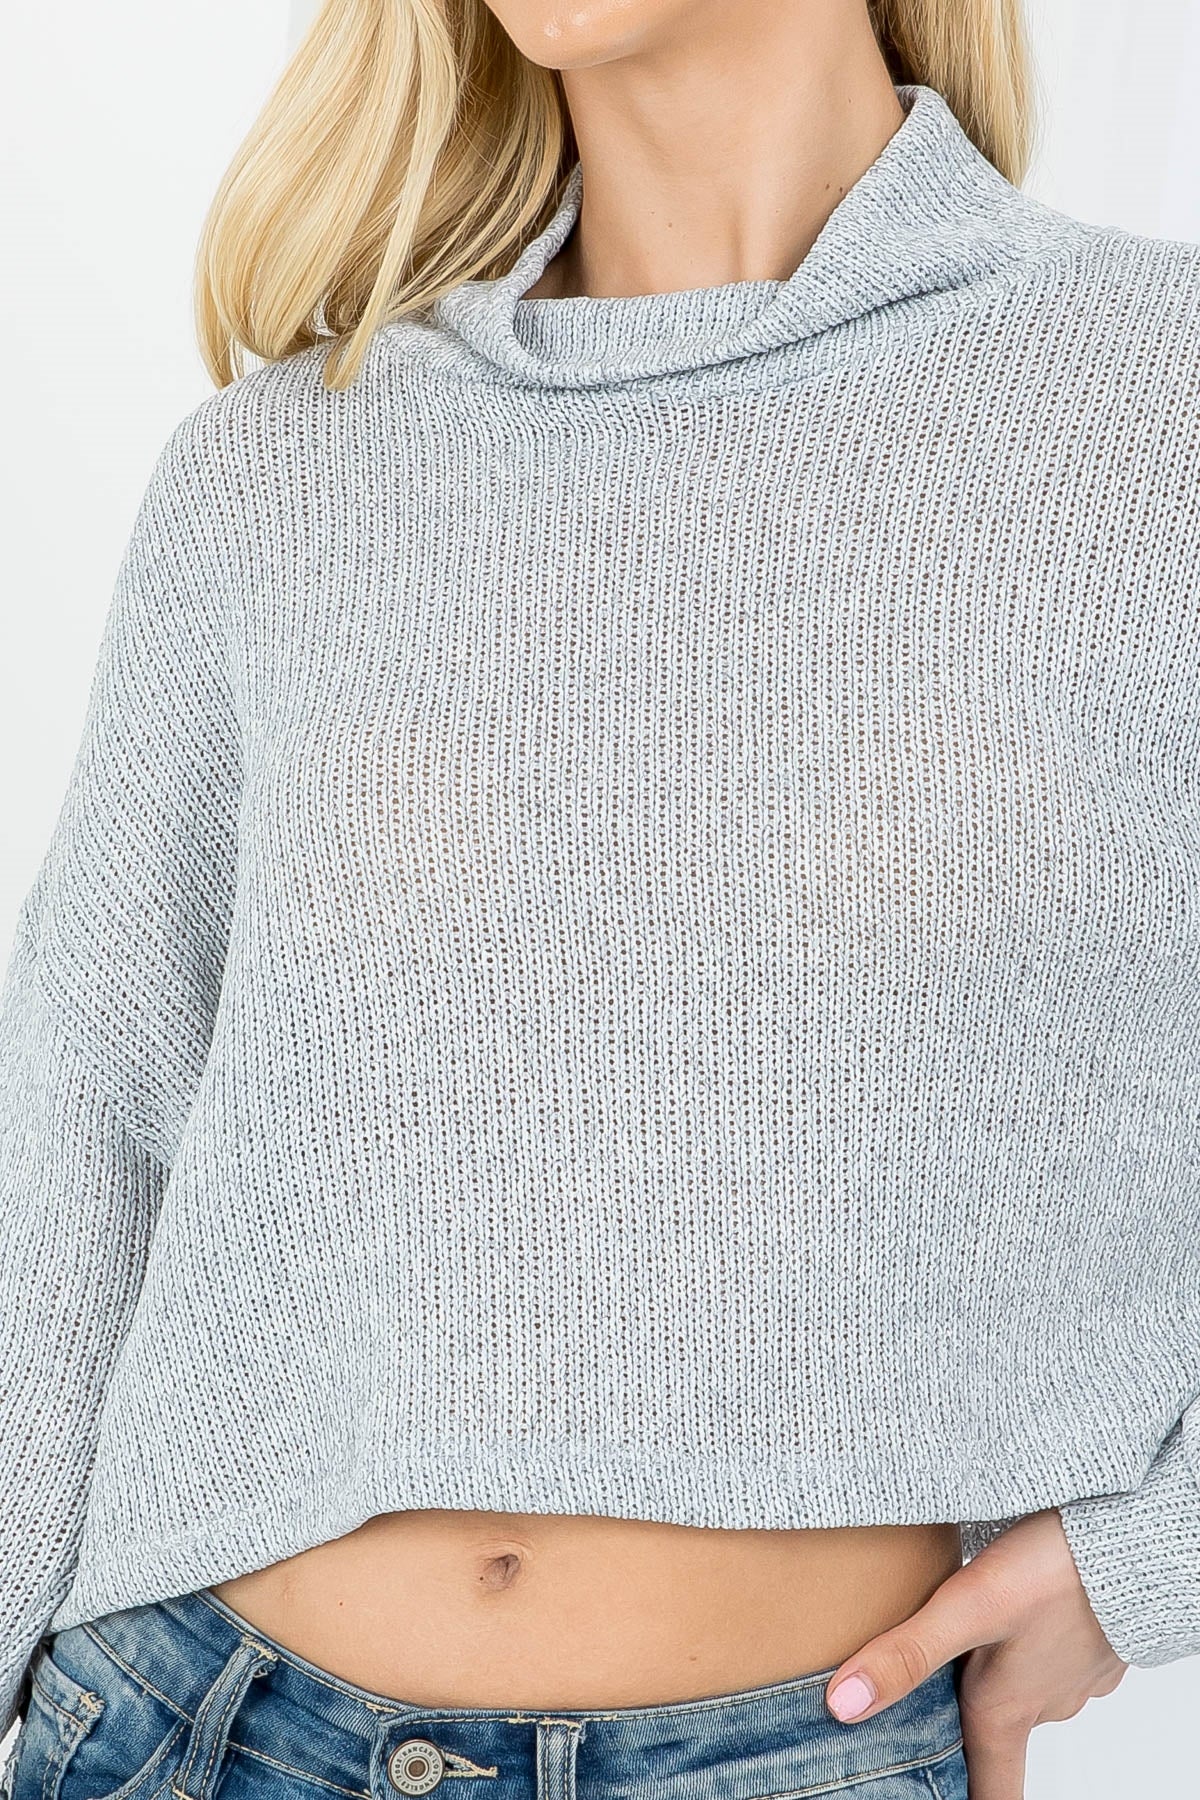 GRAY COWL NECKLINE CUFFED LONG SLEEVE KNITTED TOP (NOW $3.50 ONLY!)